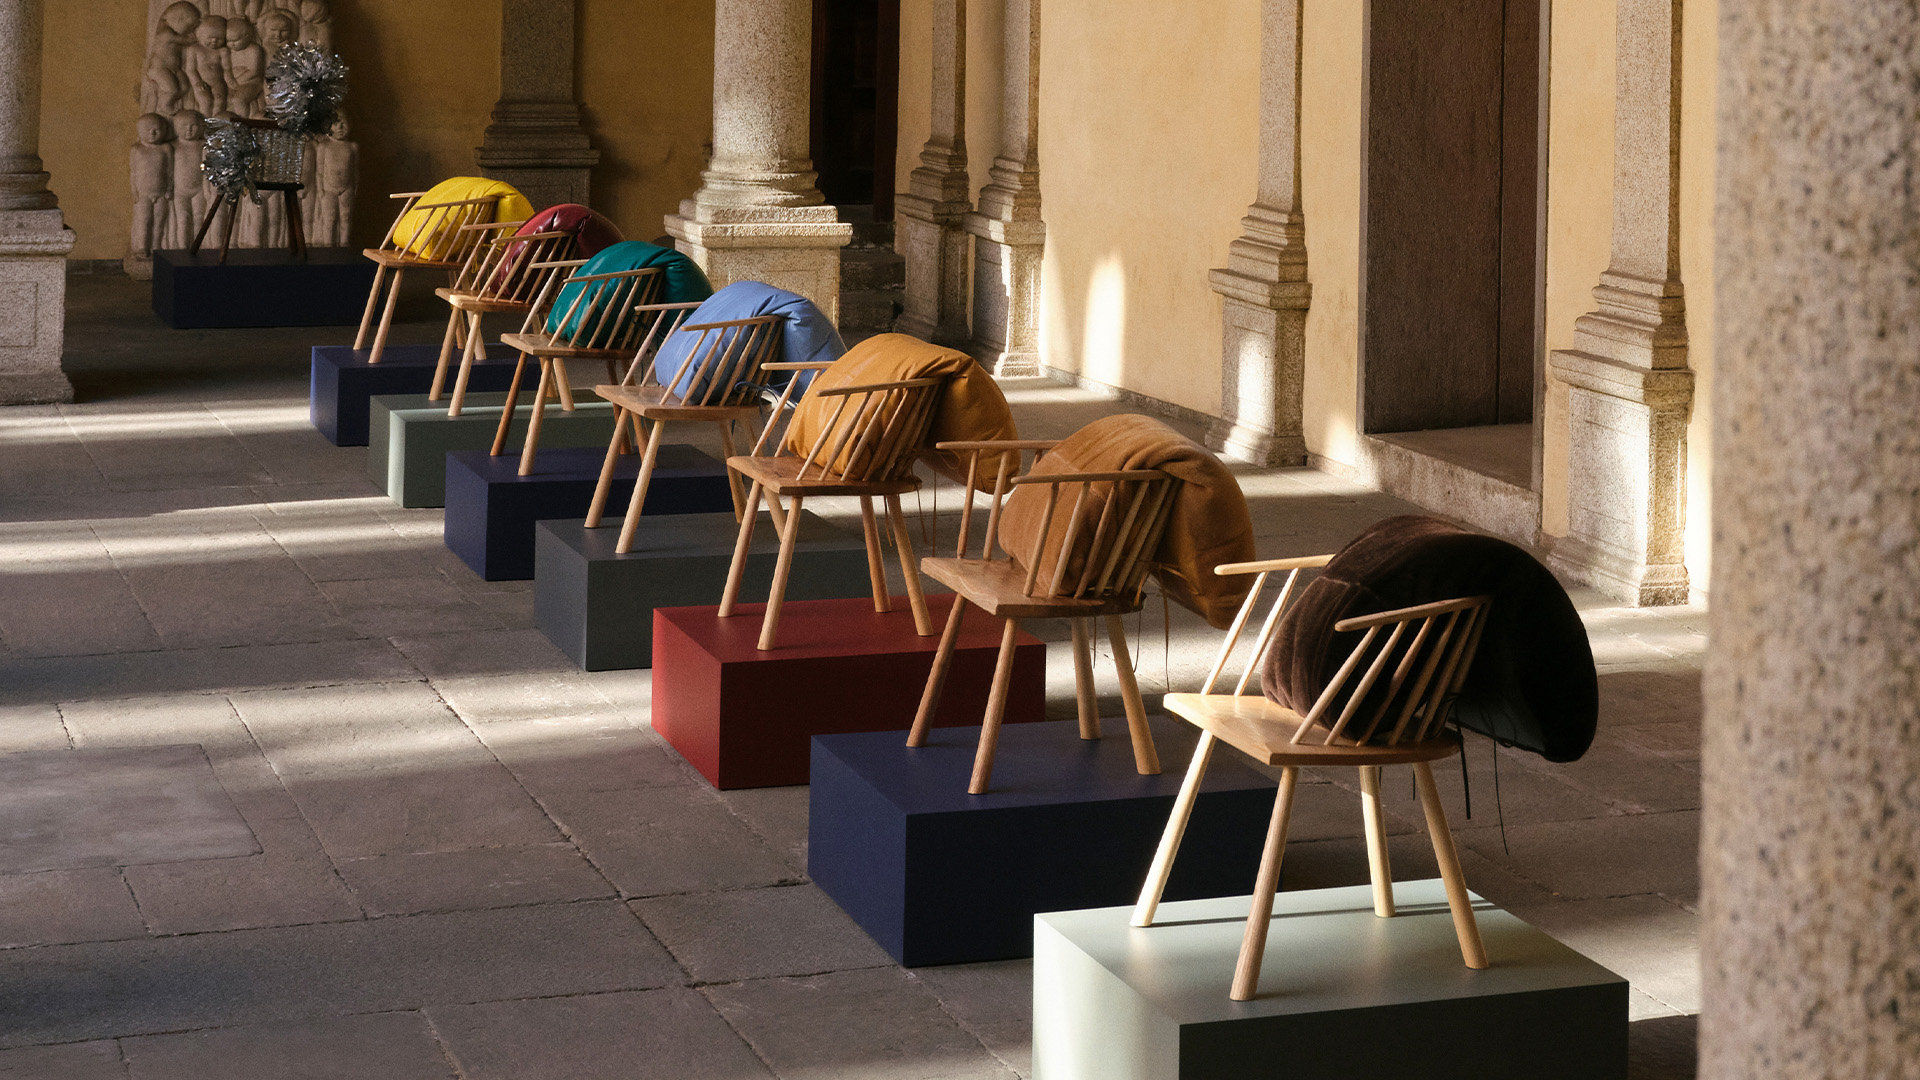 Loewe delivers an important message with its commitment to contemporary  crafts - identity